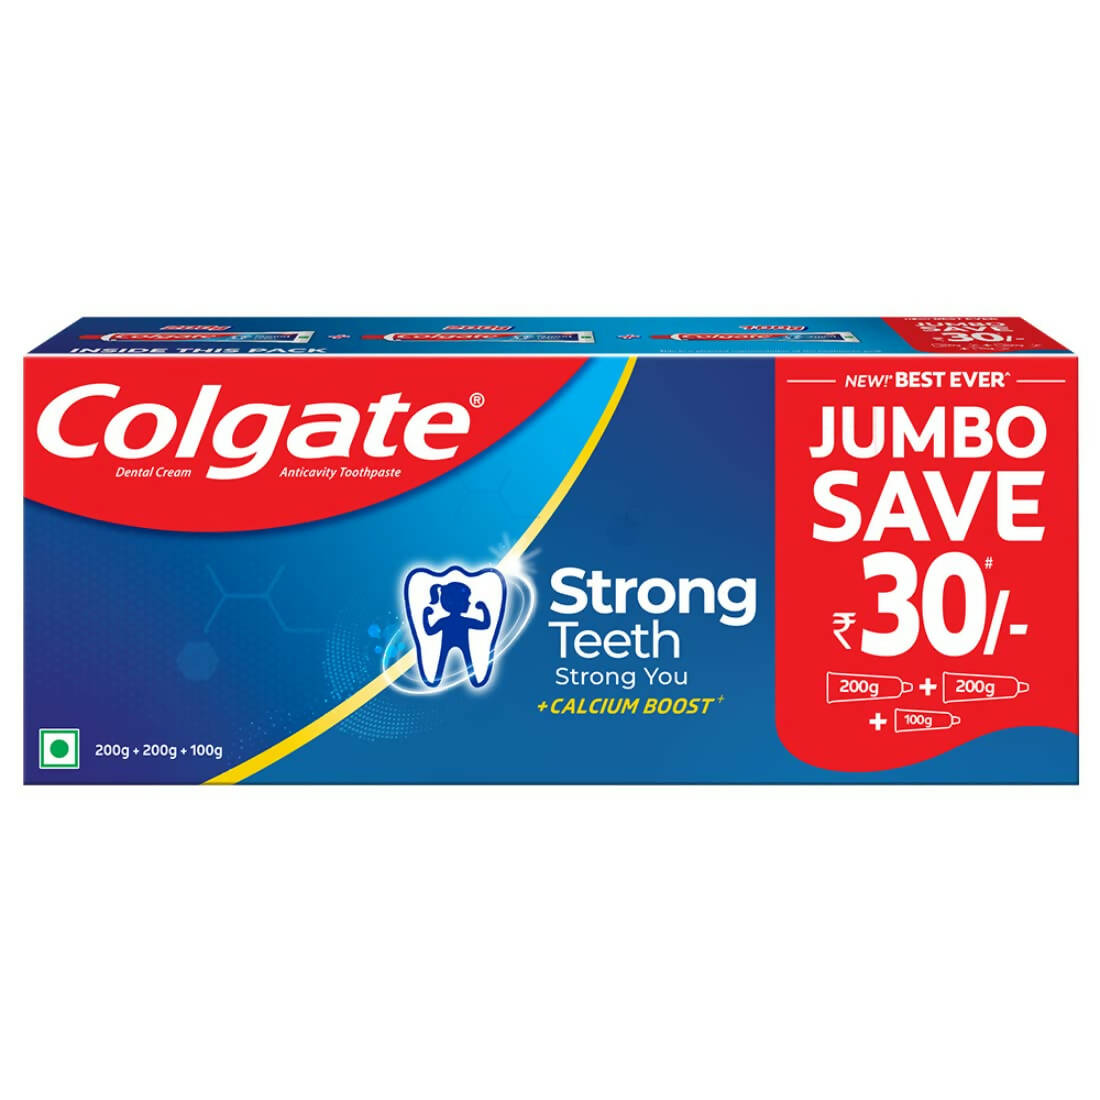 Colgate Strong Teeth Cavity Protection Toothpaste with Calcium Boost - buy in USA, Australia, Canada